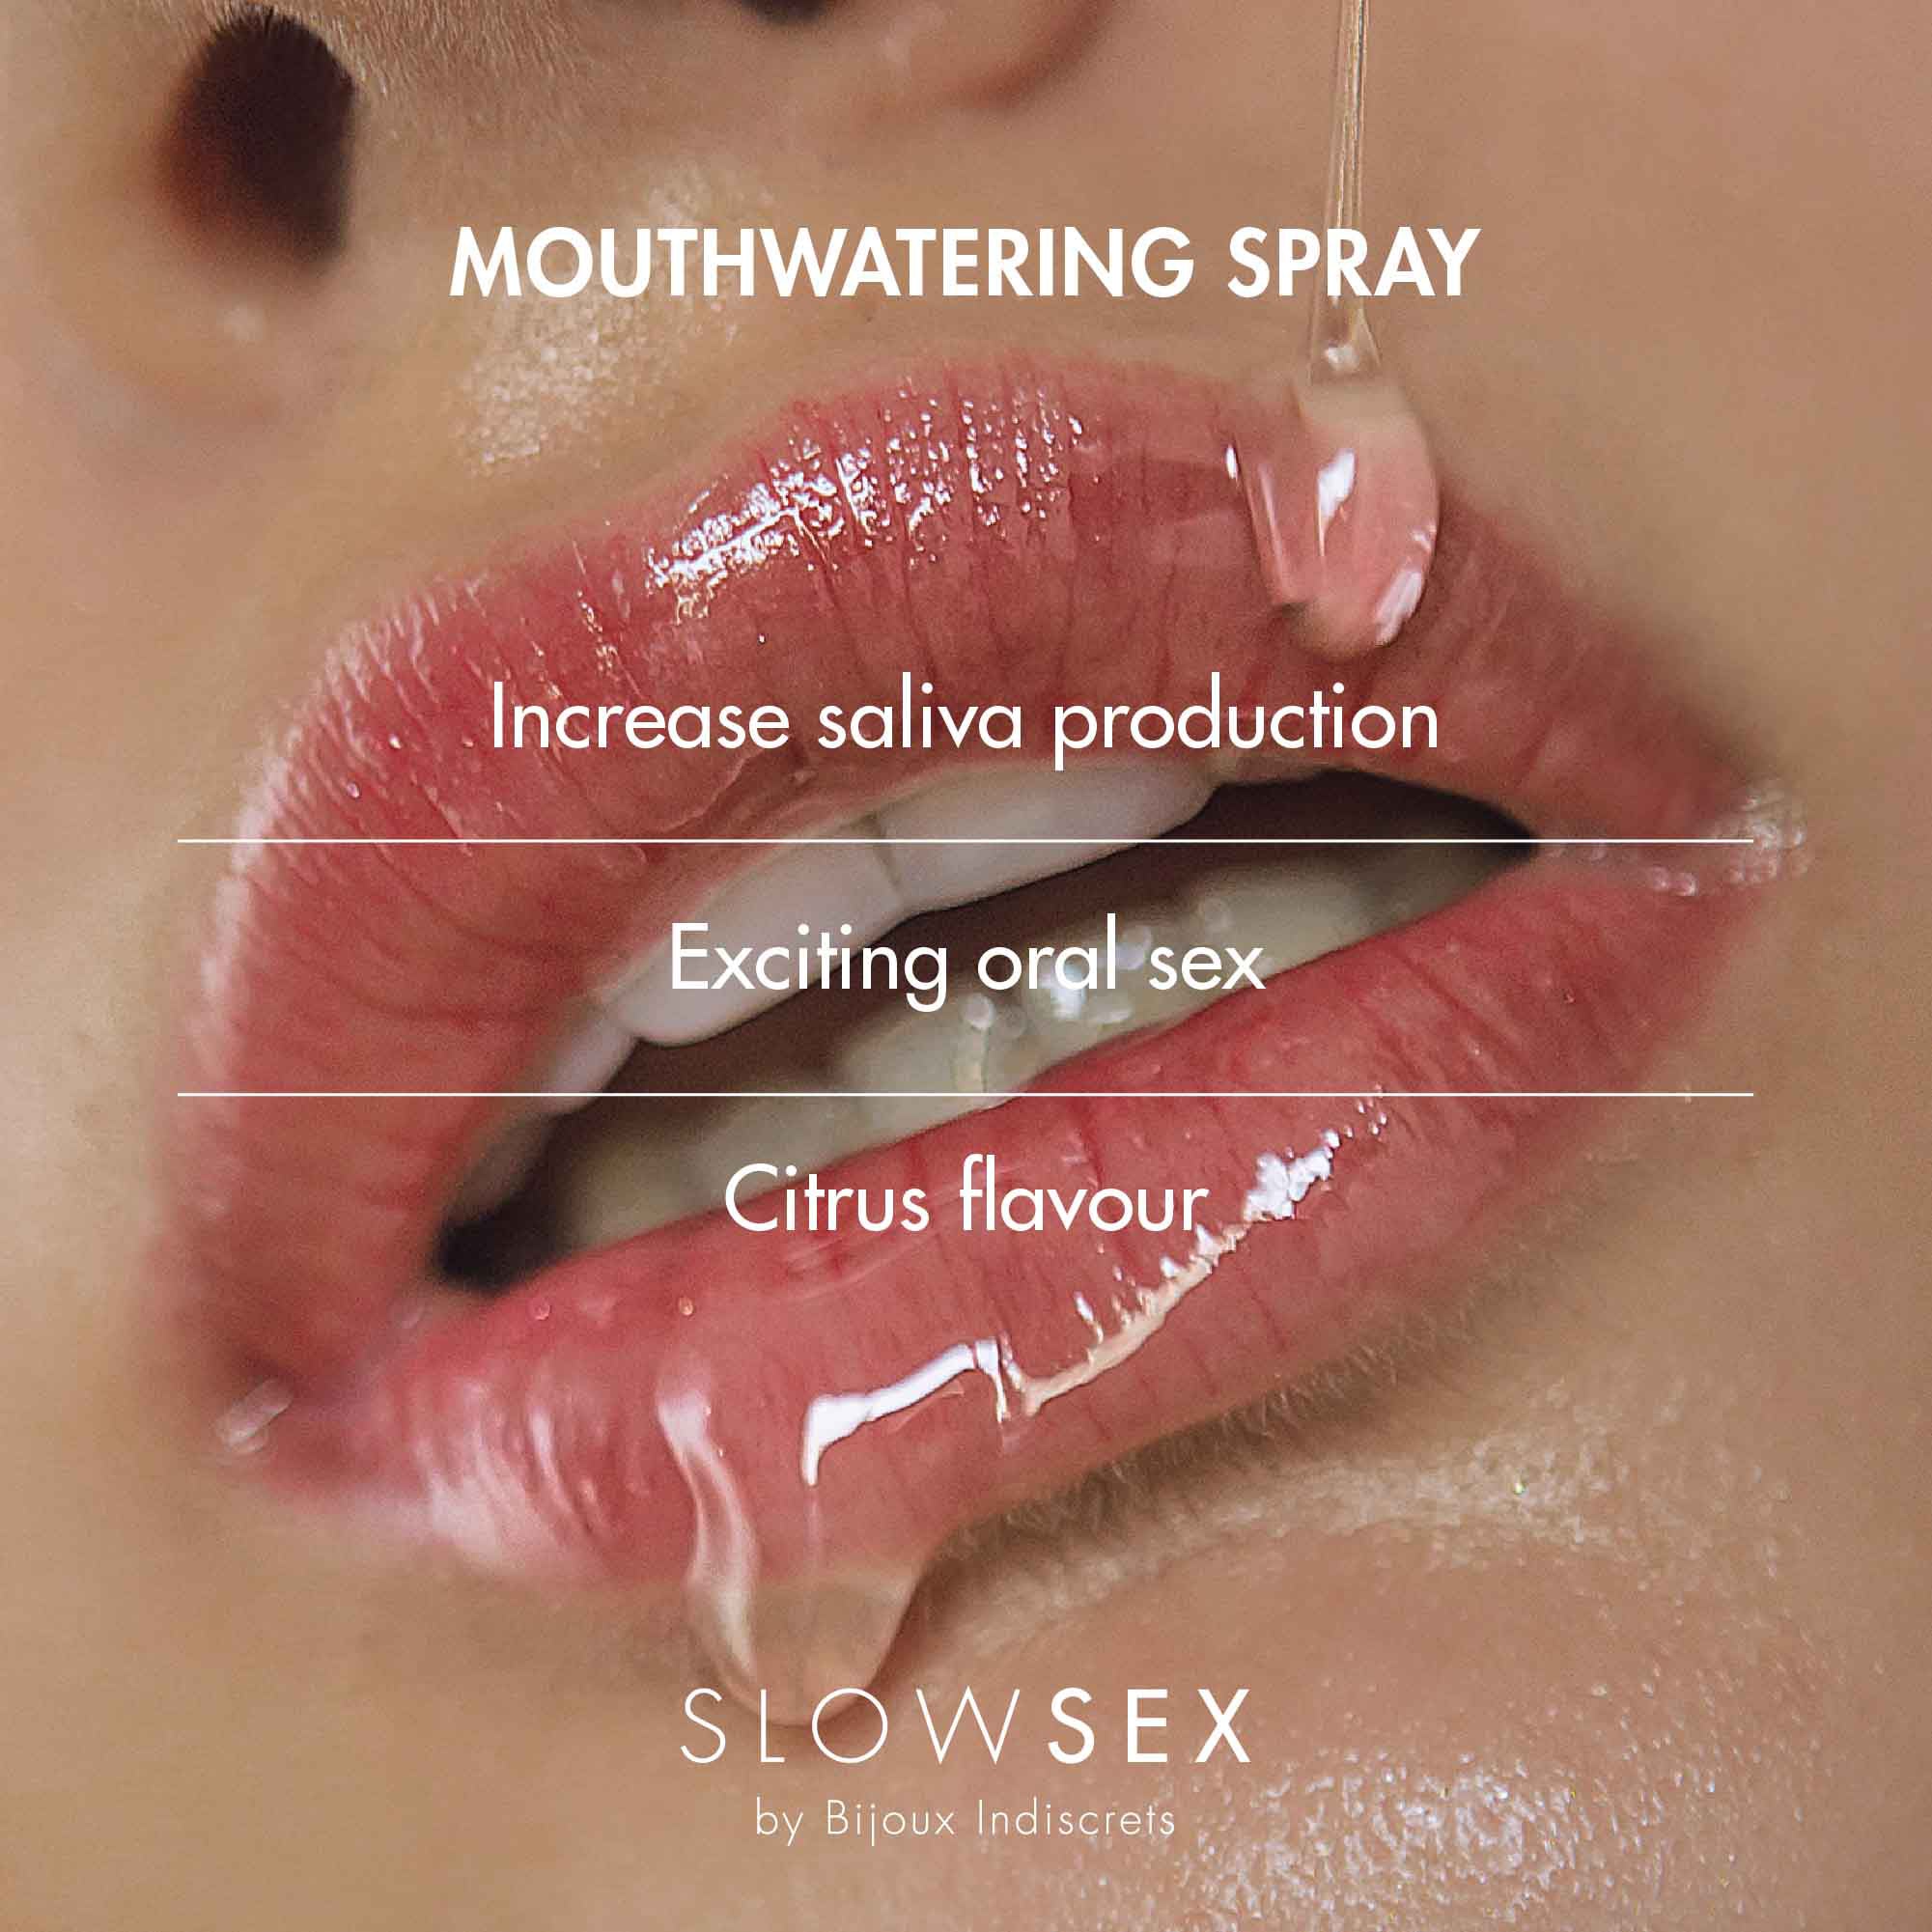 Mouthwatering spray - SLOW SEX